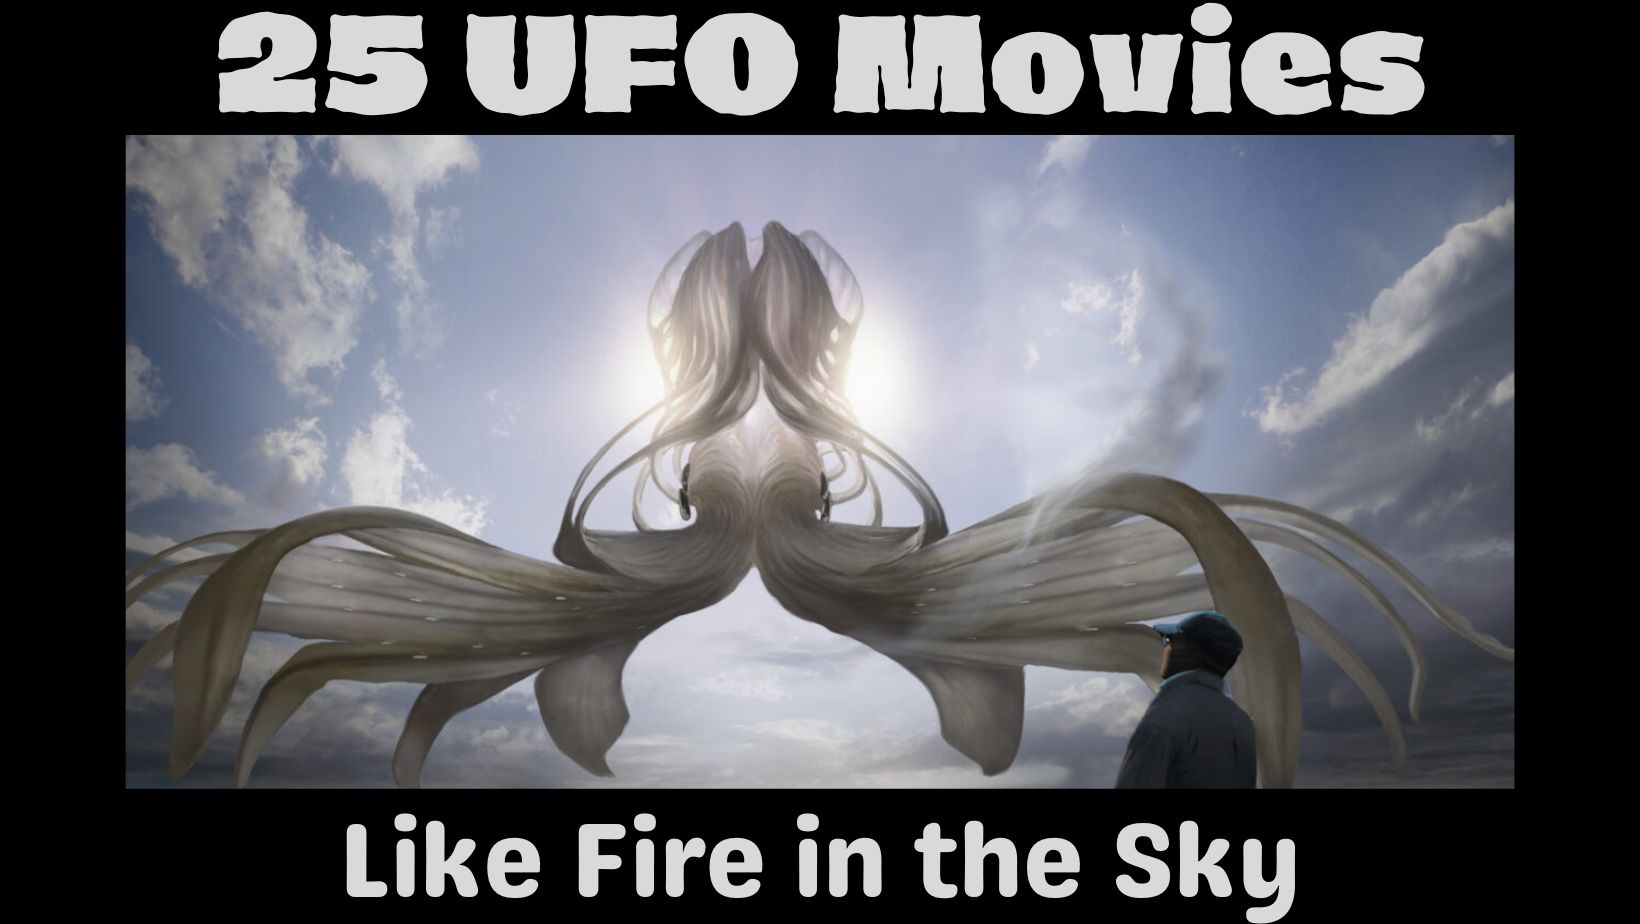 Like This Watch That: 25 UFO Movies Like Fire in the Sky